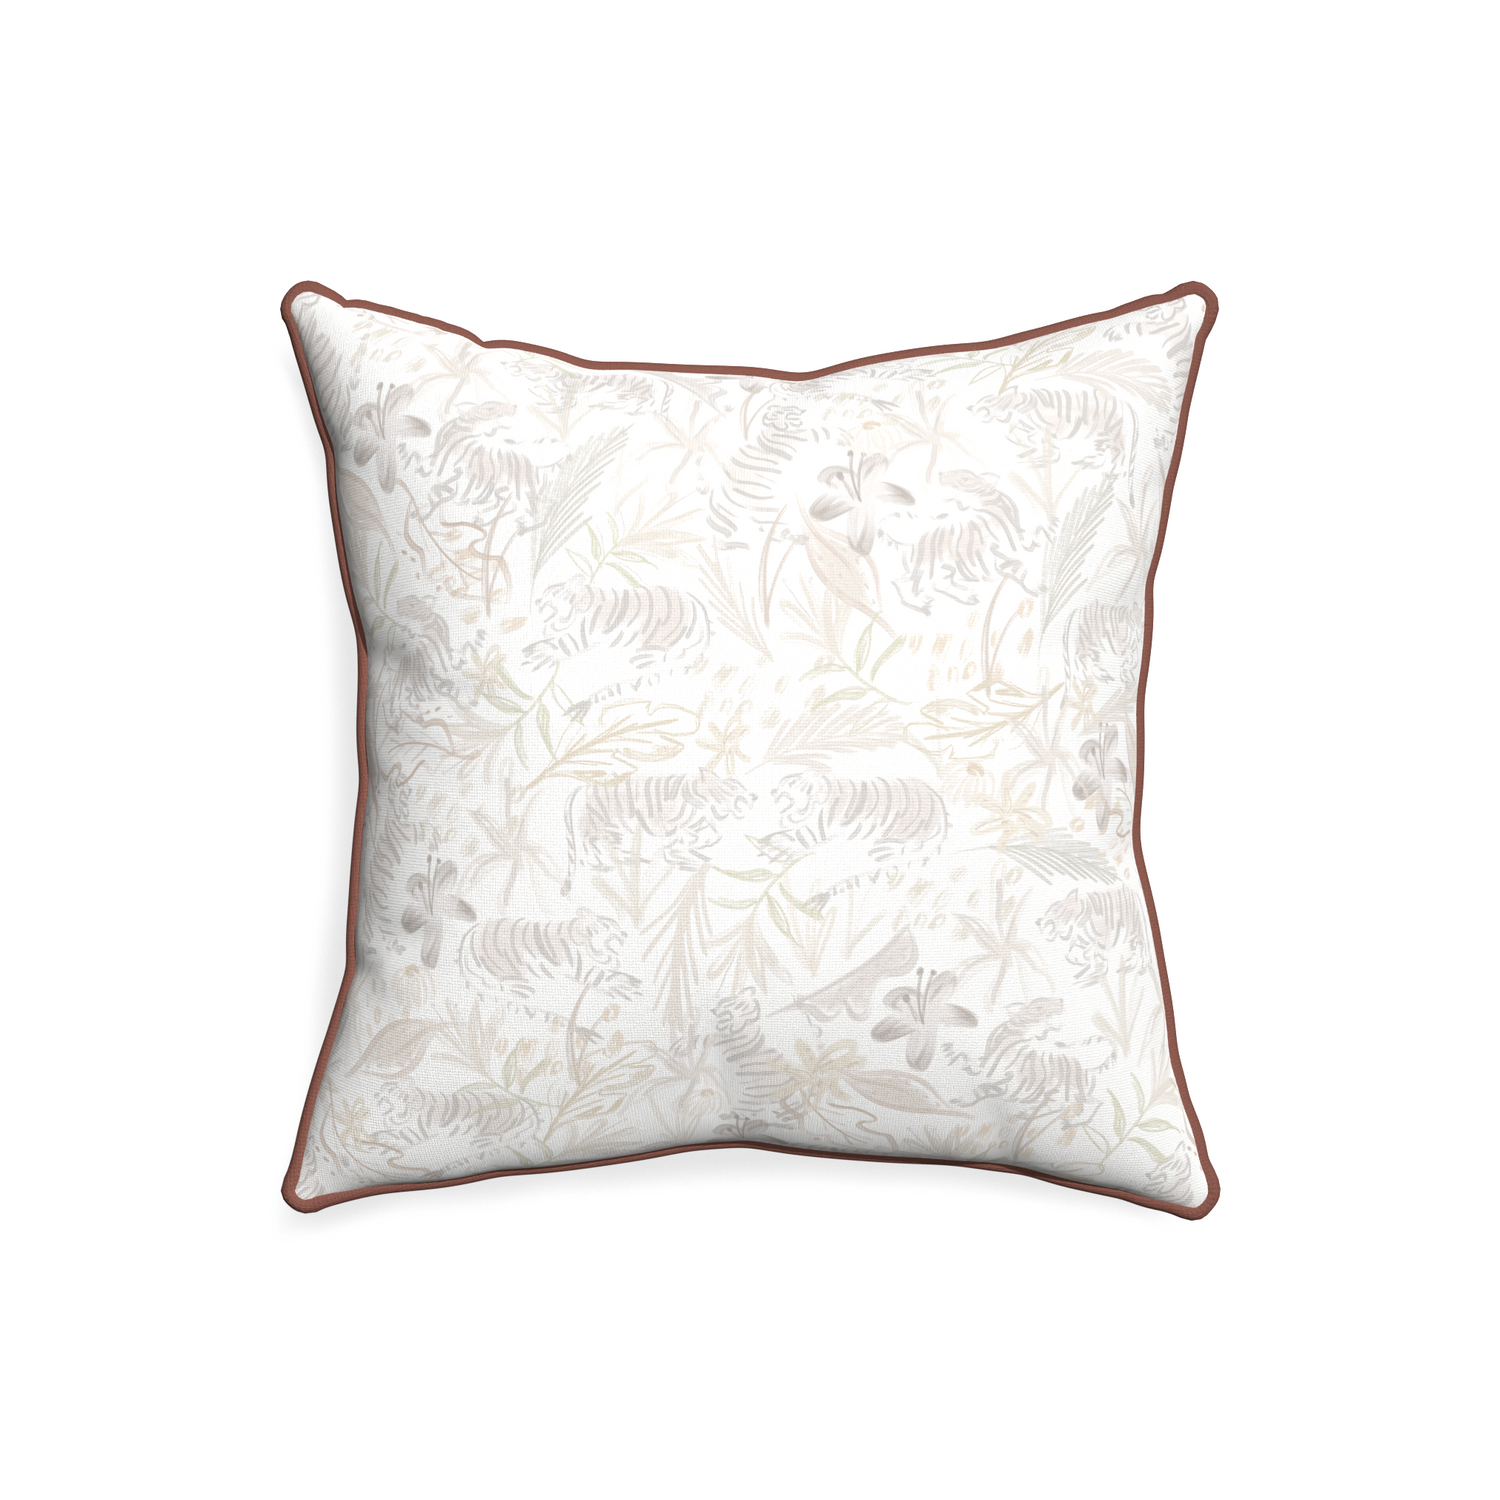 20-square frida sand custom beige chinoiserie tigerpillow with w piping on white background